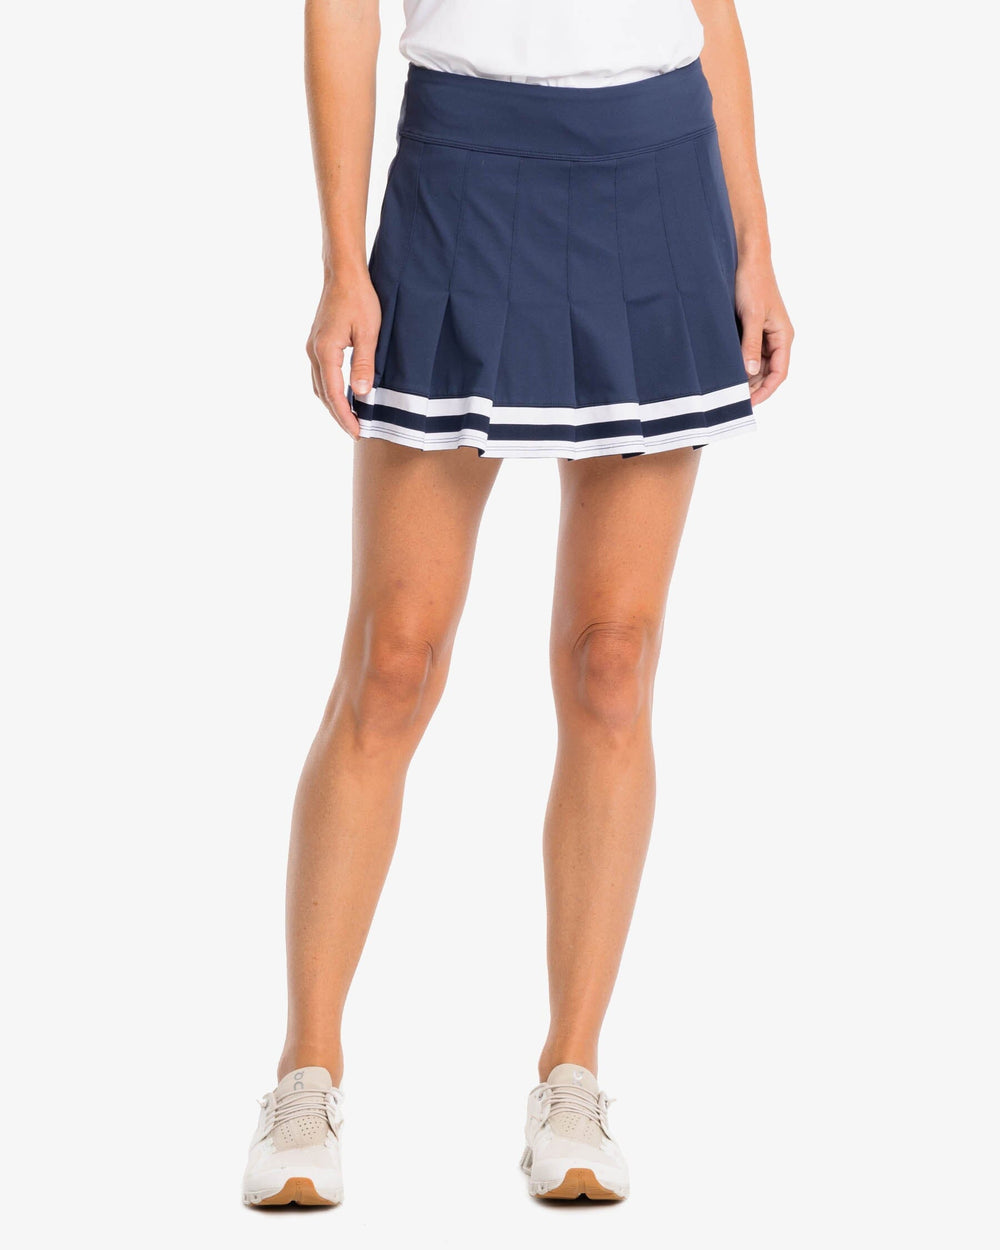 The front view of the Southern Tide Gwen Pleated Performance Skort by Southern Tide - Nautical Navy